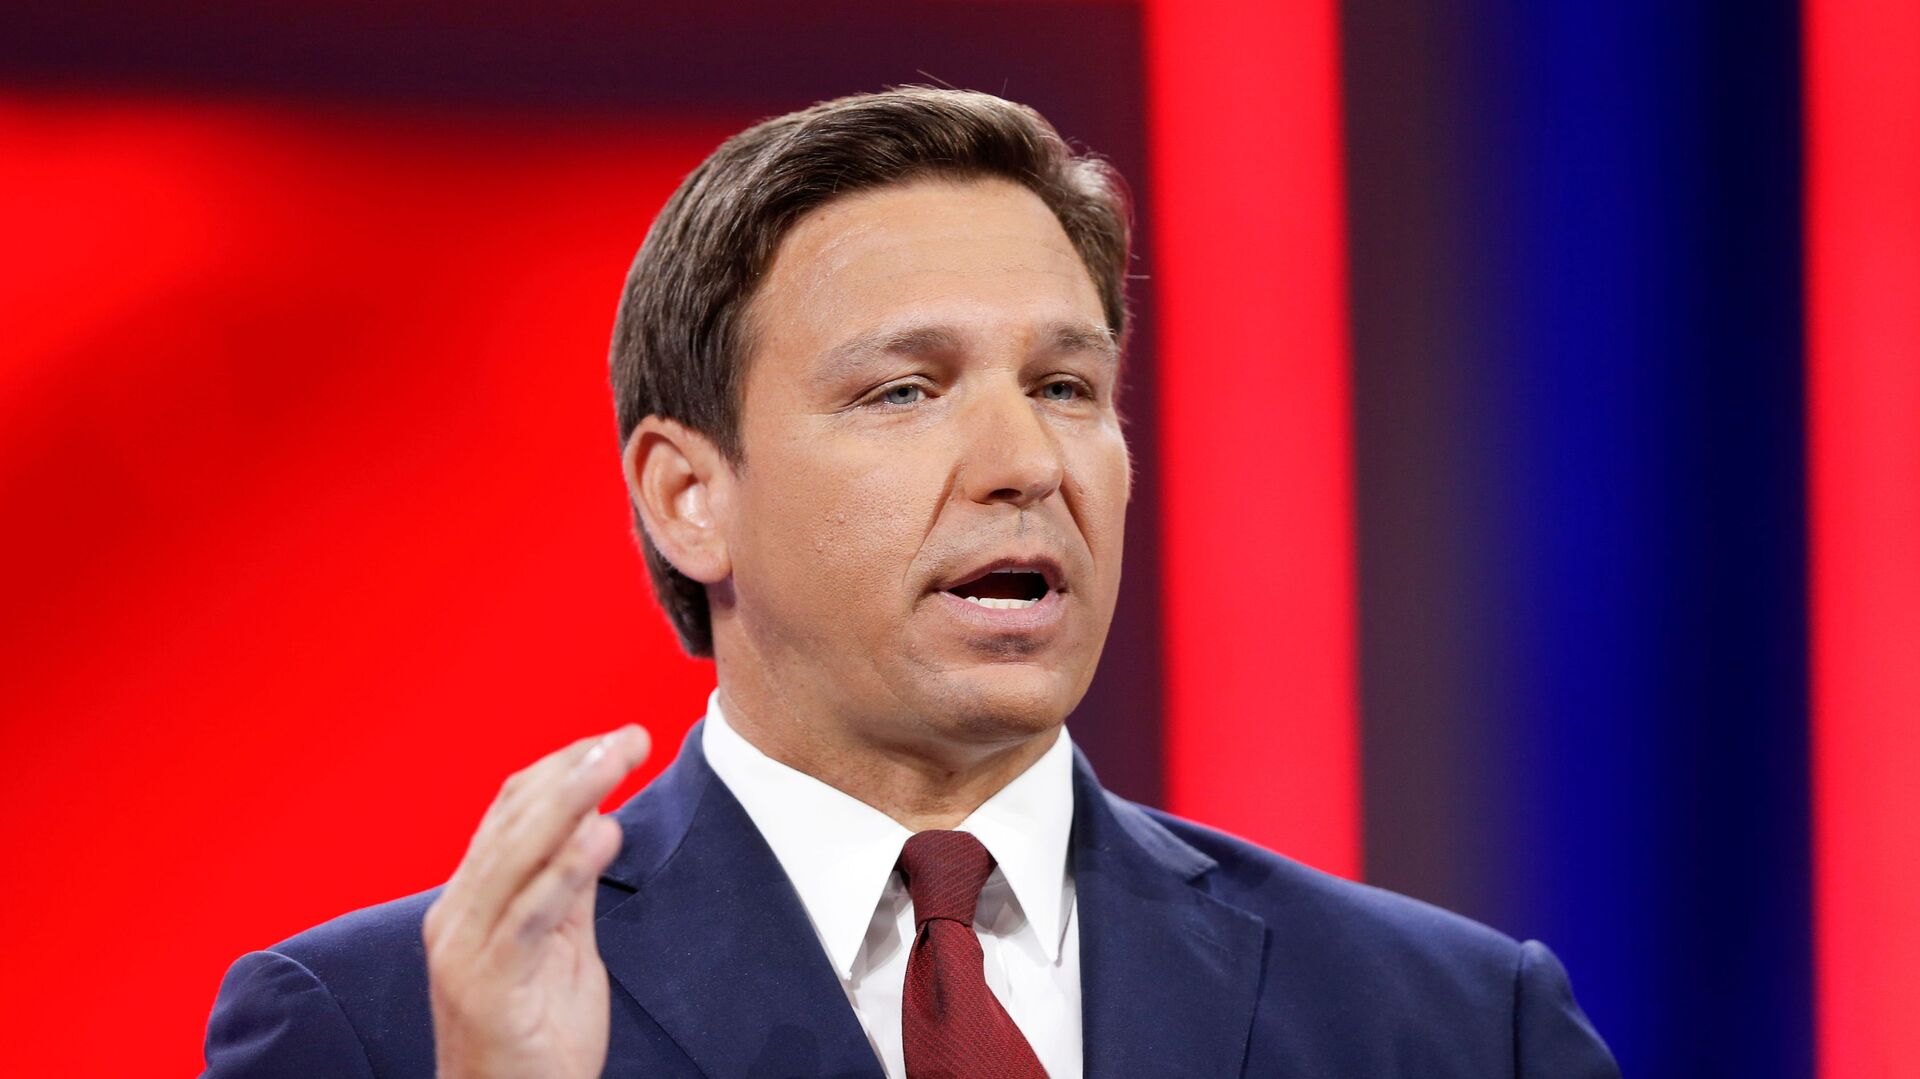 Florida Gov. Ron DeSantis speaks during the welcome segment of the Conservative Political Action Conference (CPAC) in Orlando, Florida, U.S. February 26, 2021. - Sputnik International, 1920, 03.09.2021